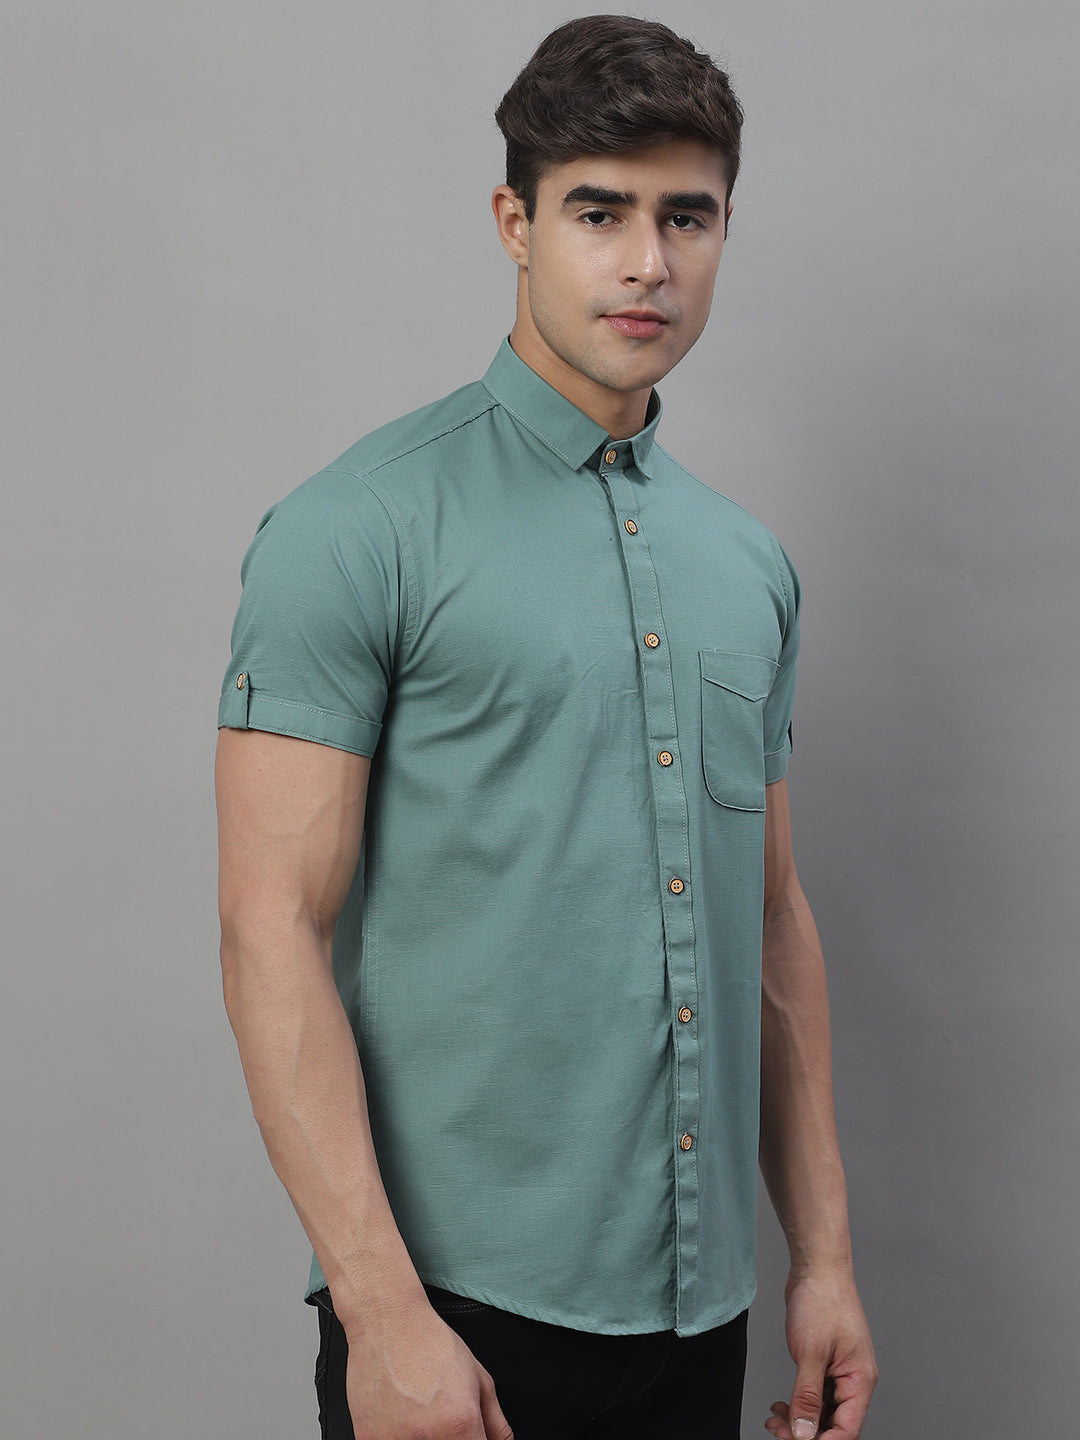 Kicky Pure Cotton Half sleeves Solid Shirt - Dusty Teal